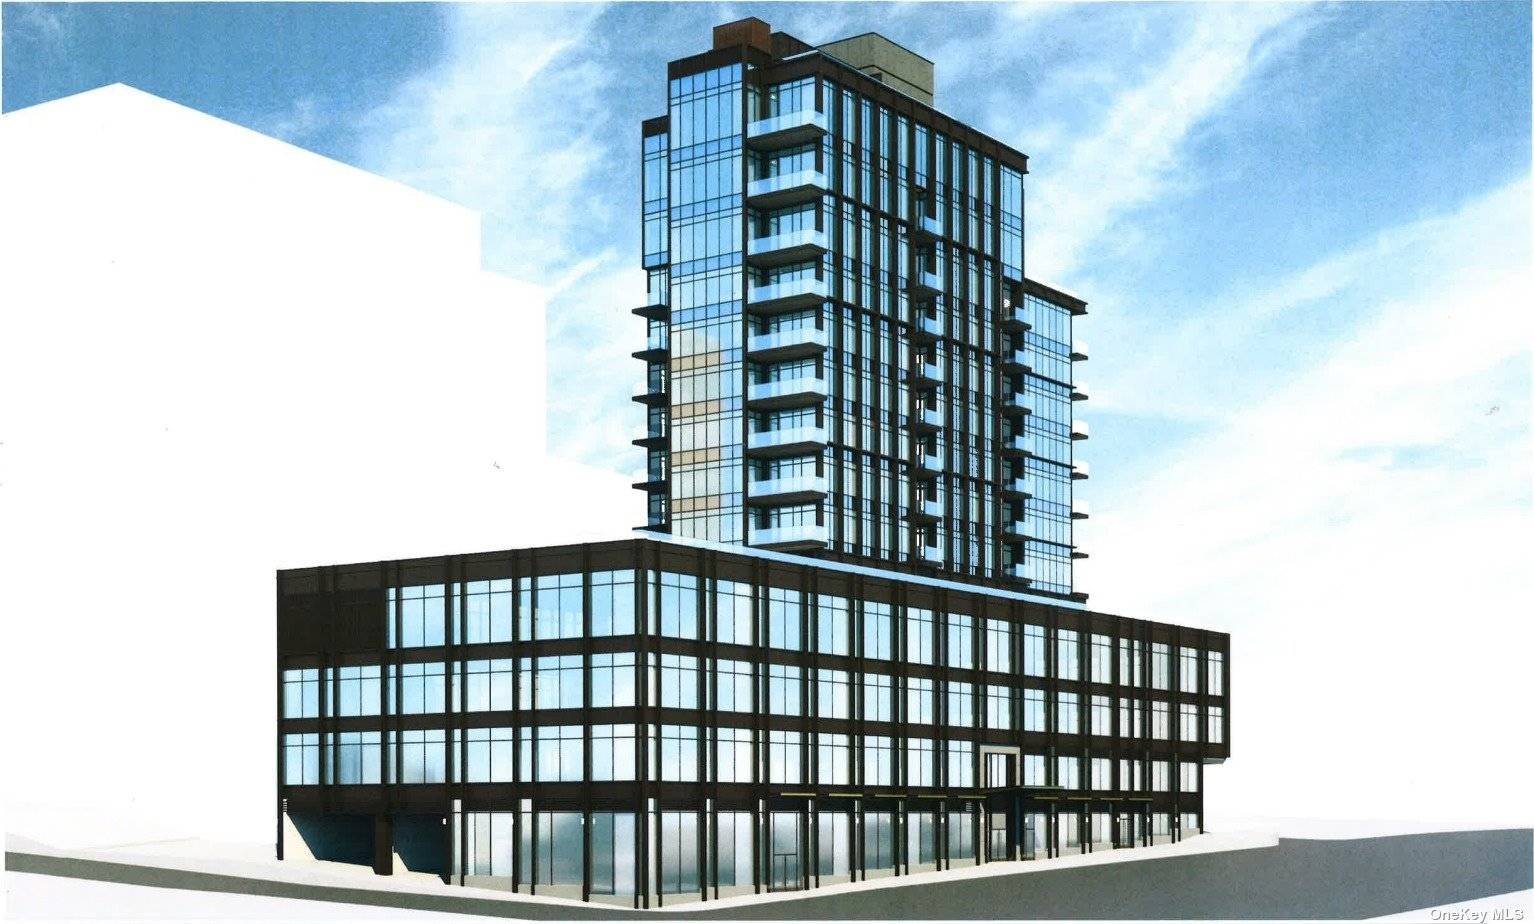 The subject property is an upcoming mixed use building in Downtown Flushing, anticipated to be finished by the end of 2025.